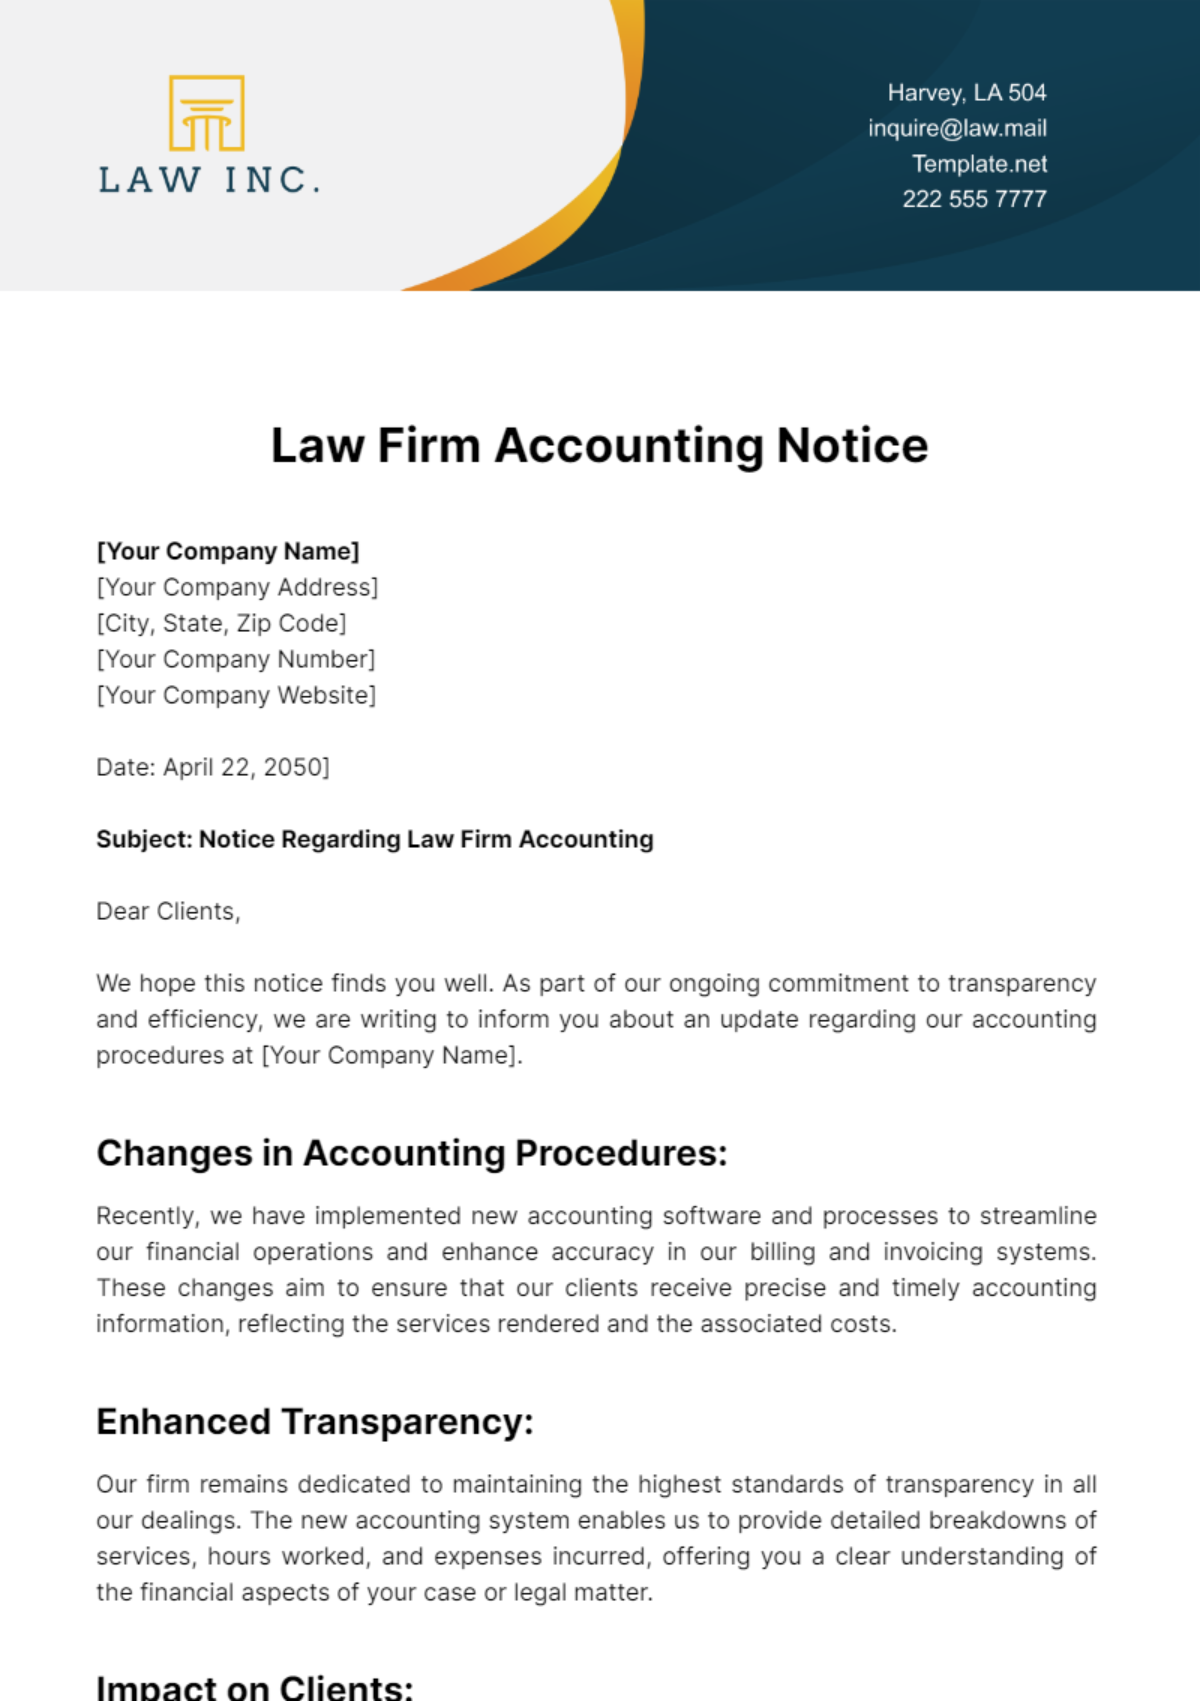 Free Law Firm Accounting Notice Template